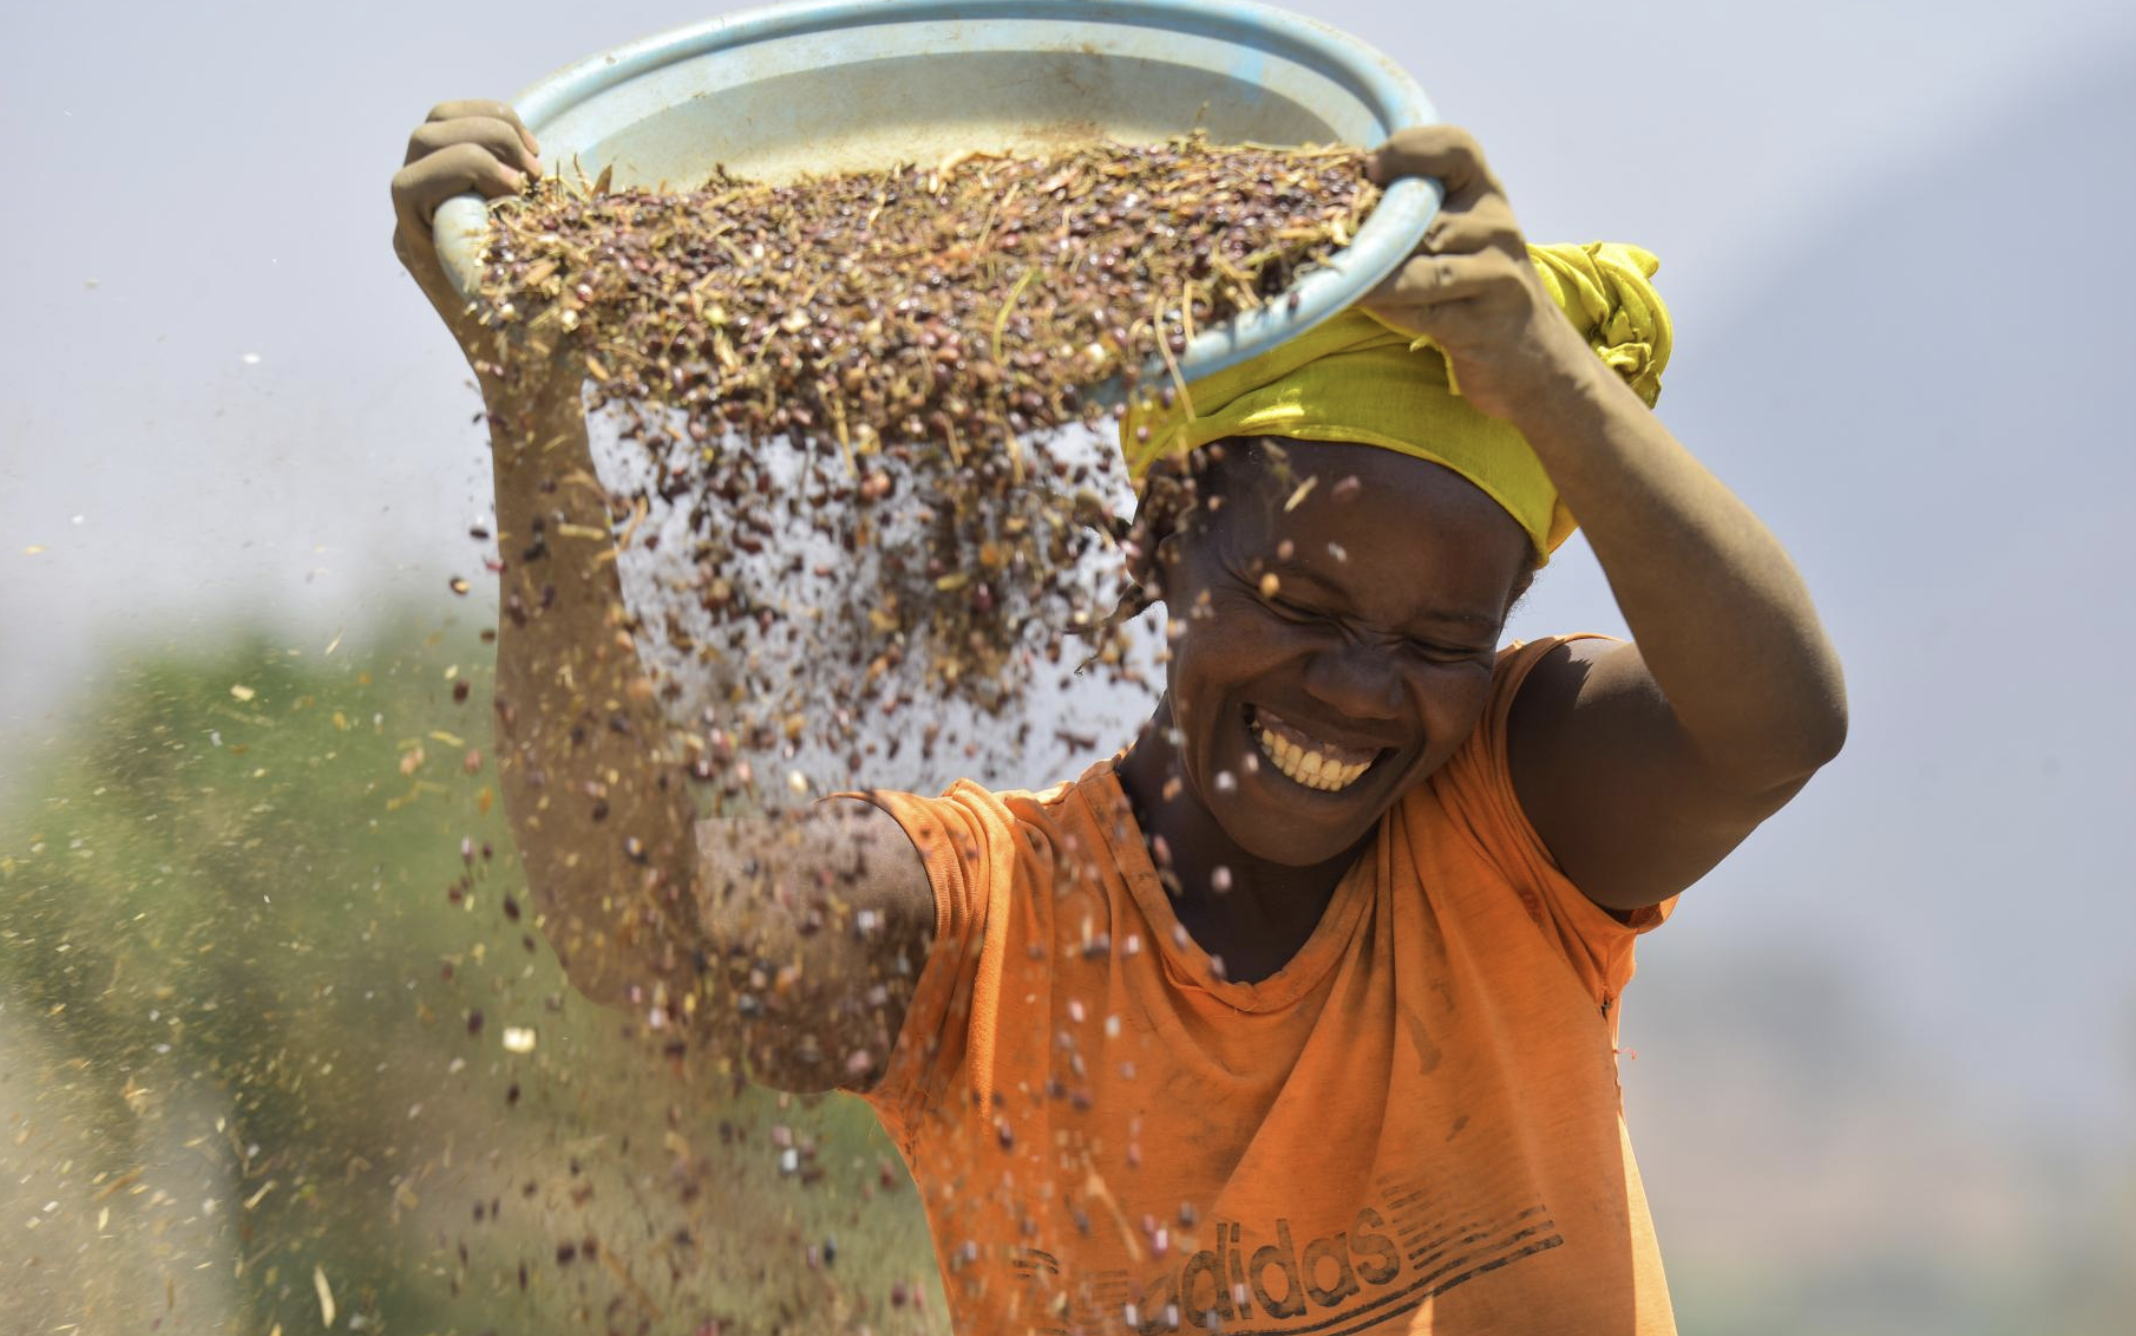 Caption: Food insecurity is driven by many factors including shifting commodity prices, variable production levels, conflict and displacement, income inequality, urbanization, and trade disruptions.  Photo: © WFP/Luise Shikongo